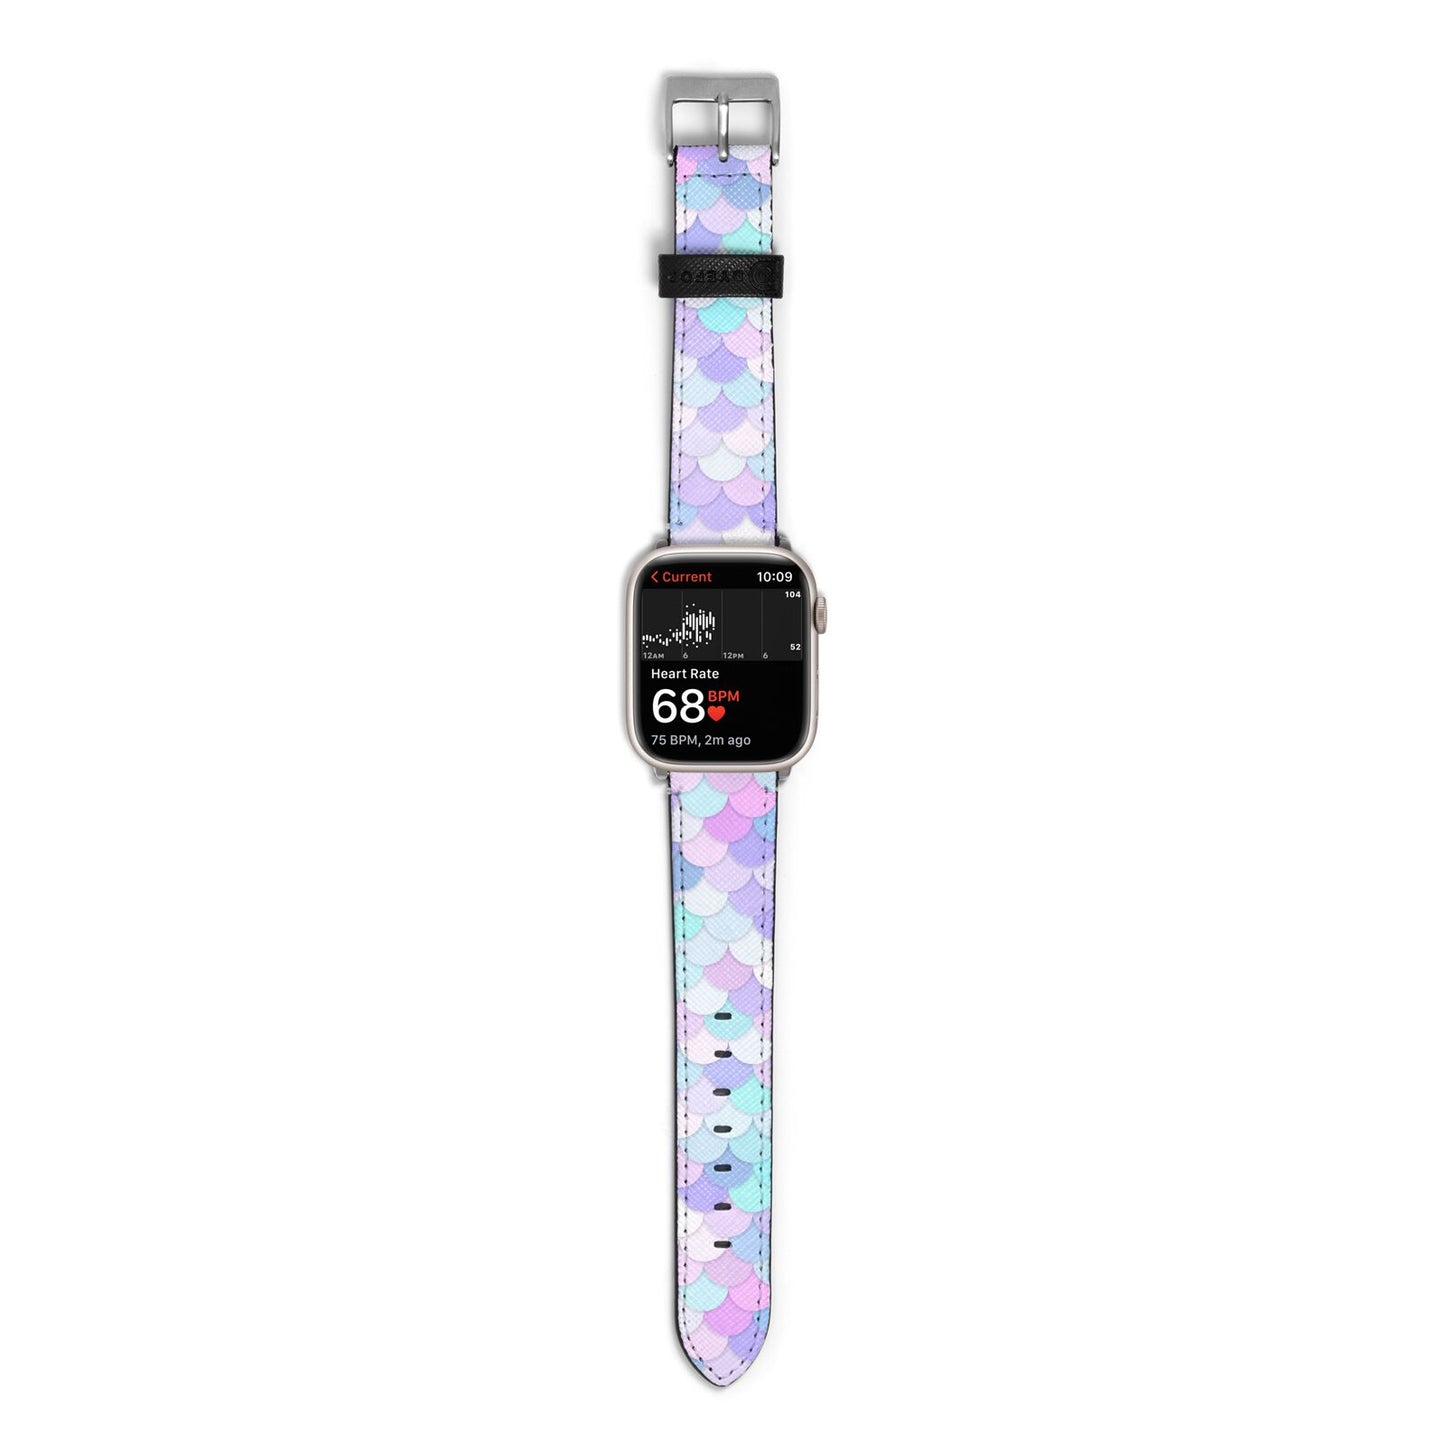 Mermaid Apple Watch Strap Size 38mm with Silver Hardware